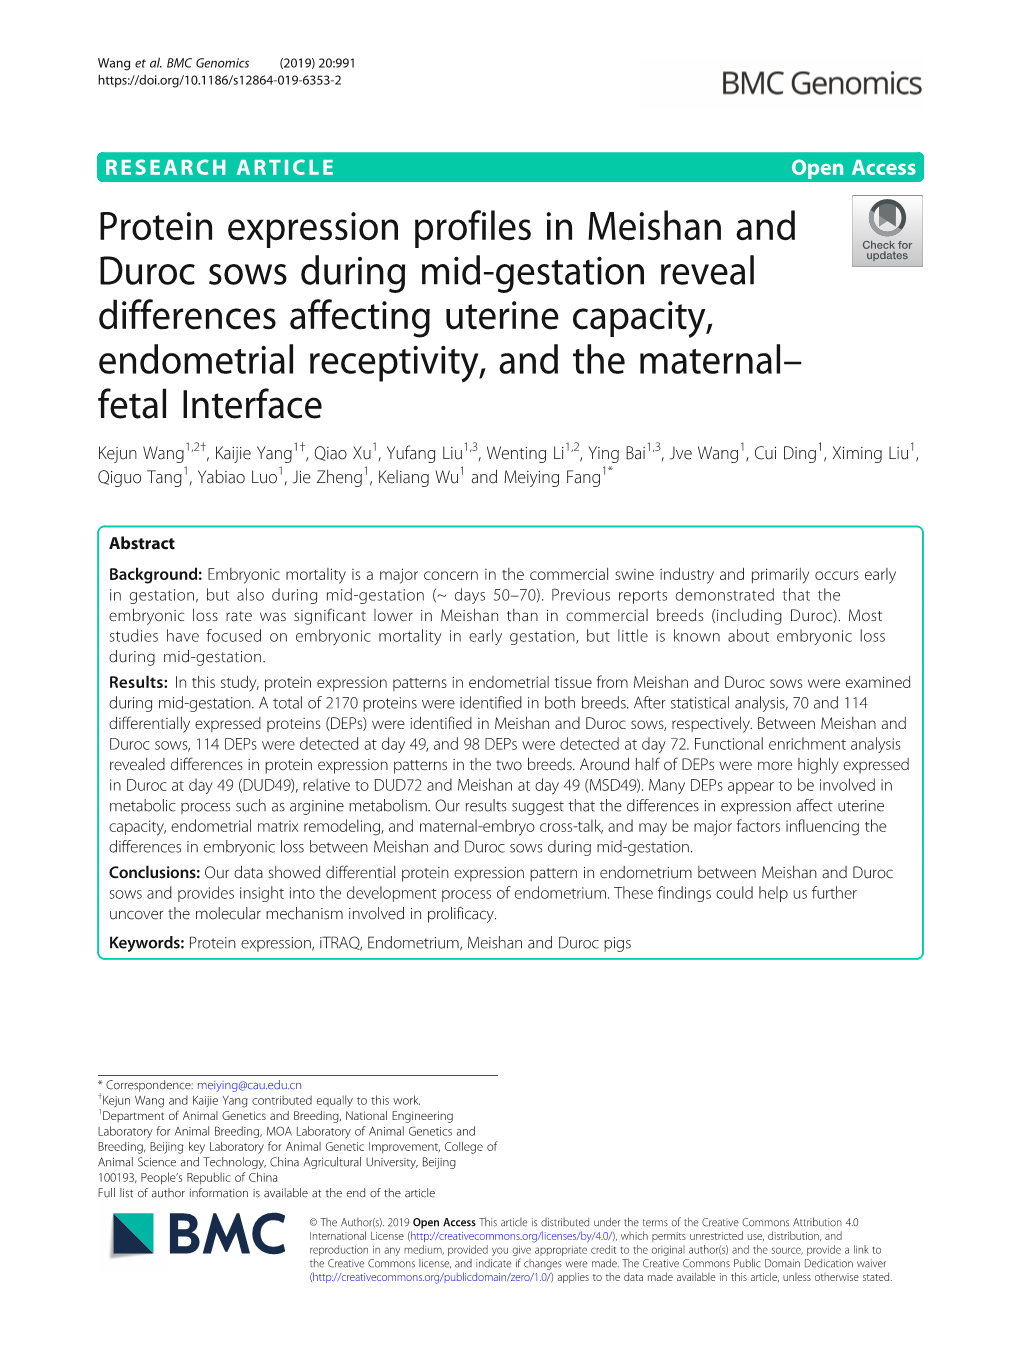 Protein Expression Profiles in Meishan and Duroc Sows During Mid